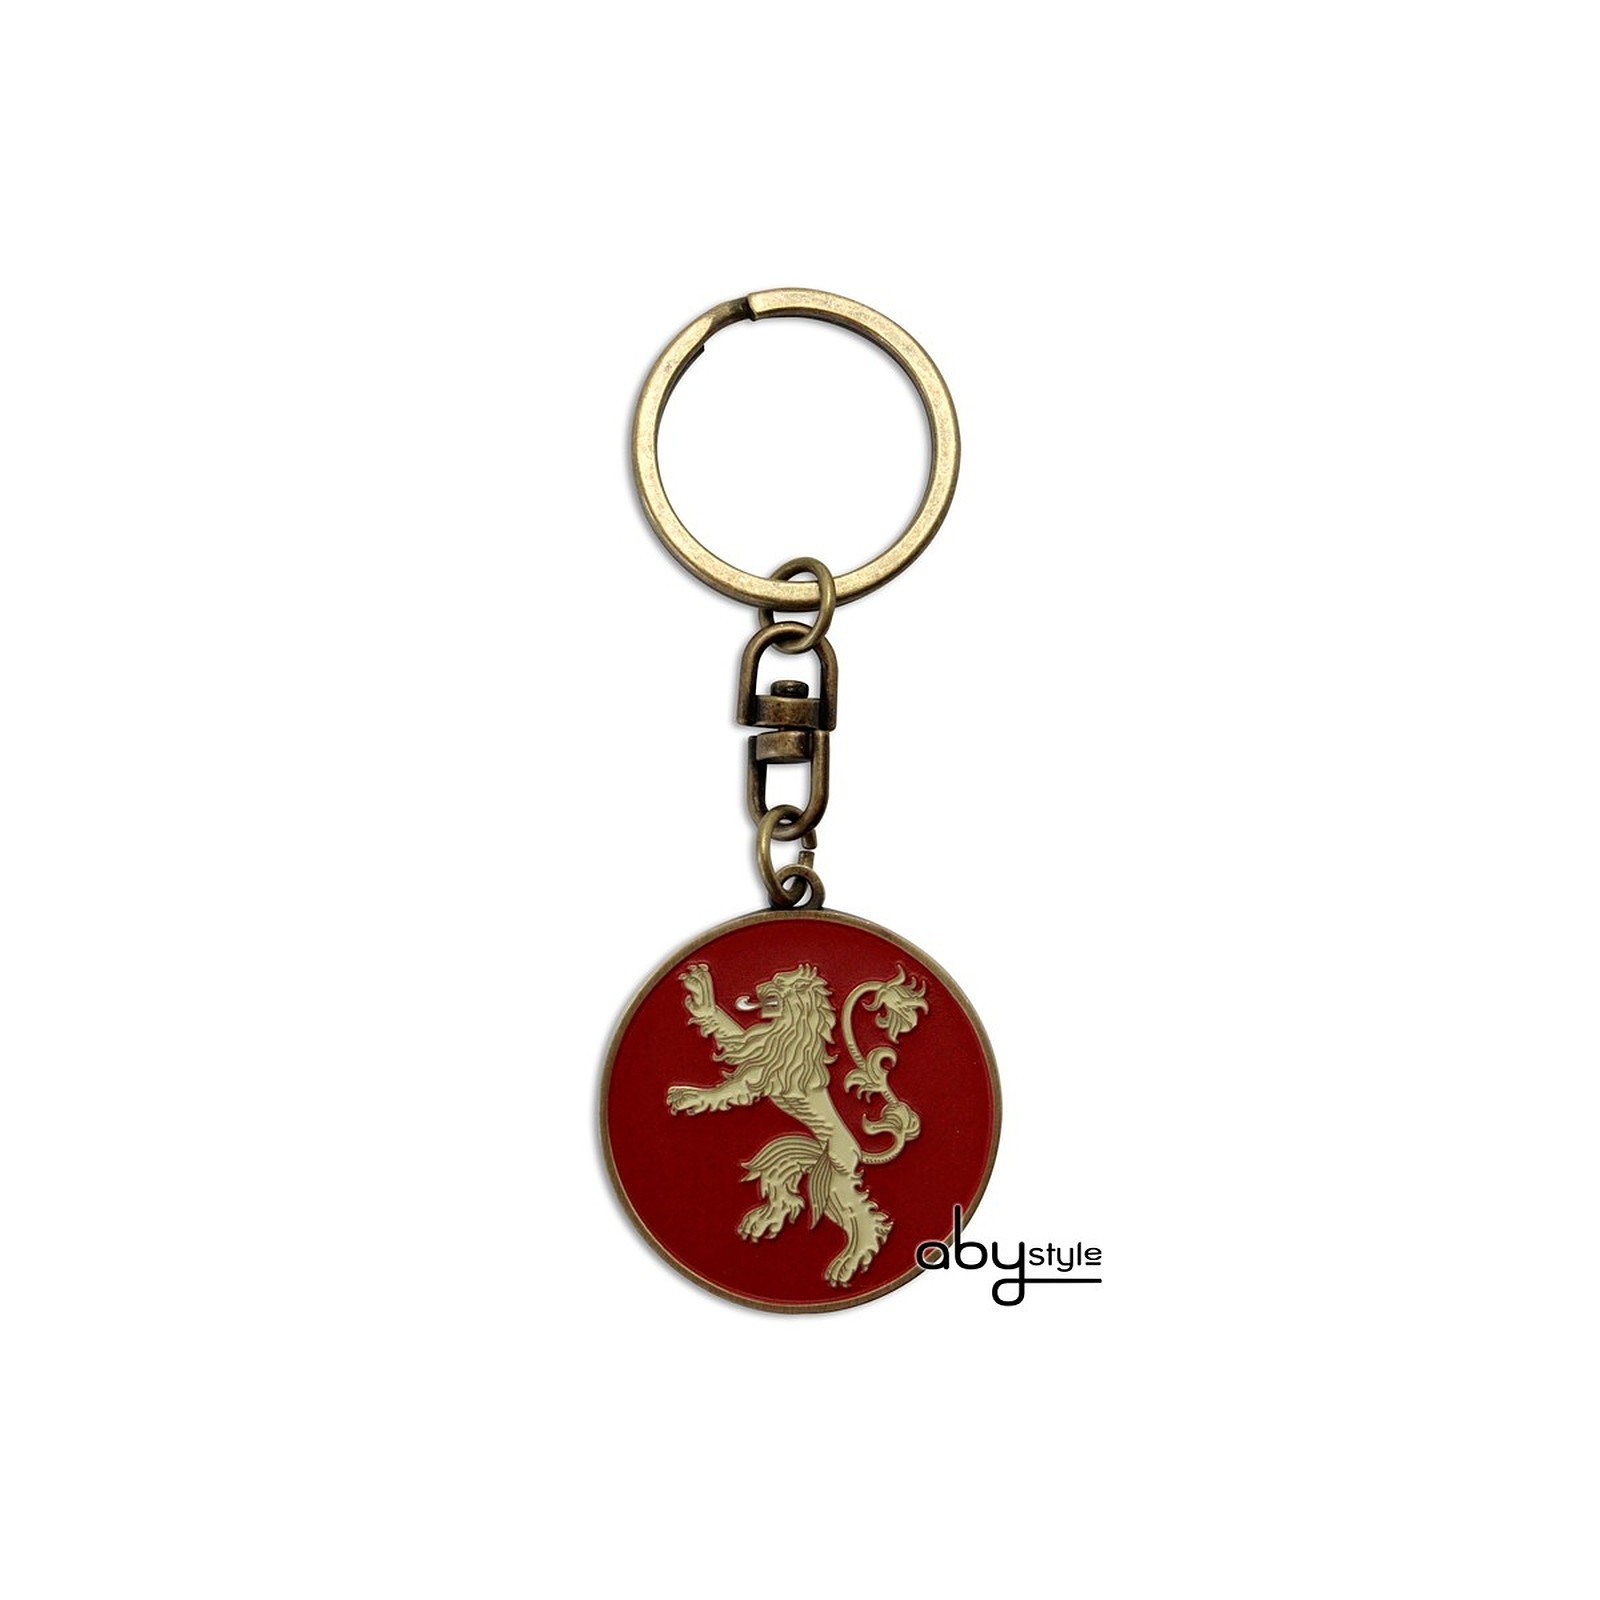 GAME OF THRONES - Porte-cles Lannister - Porte-cles Abystyle